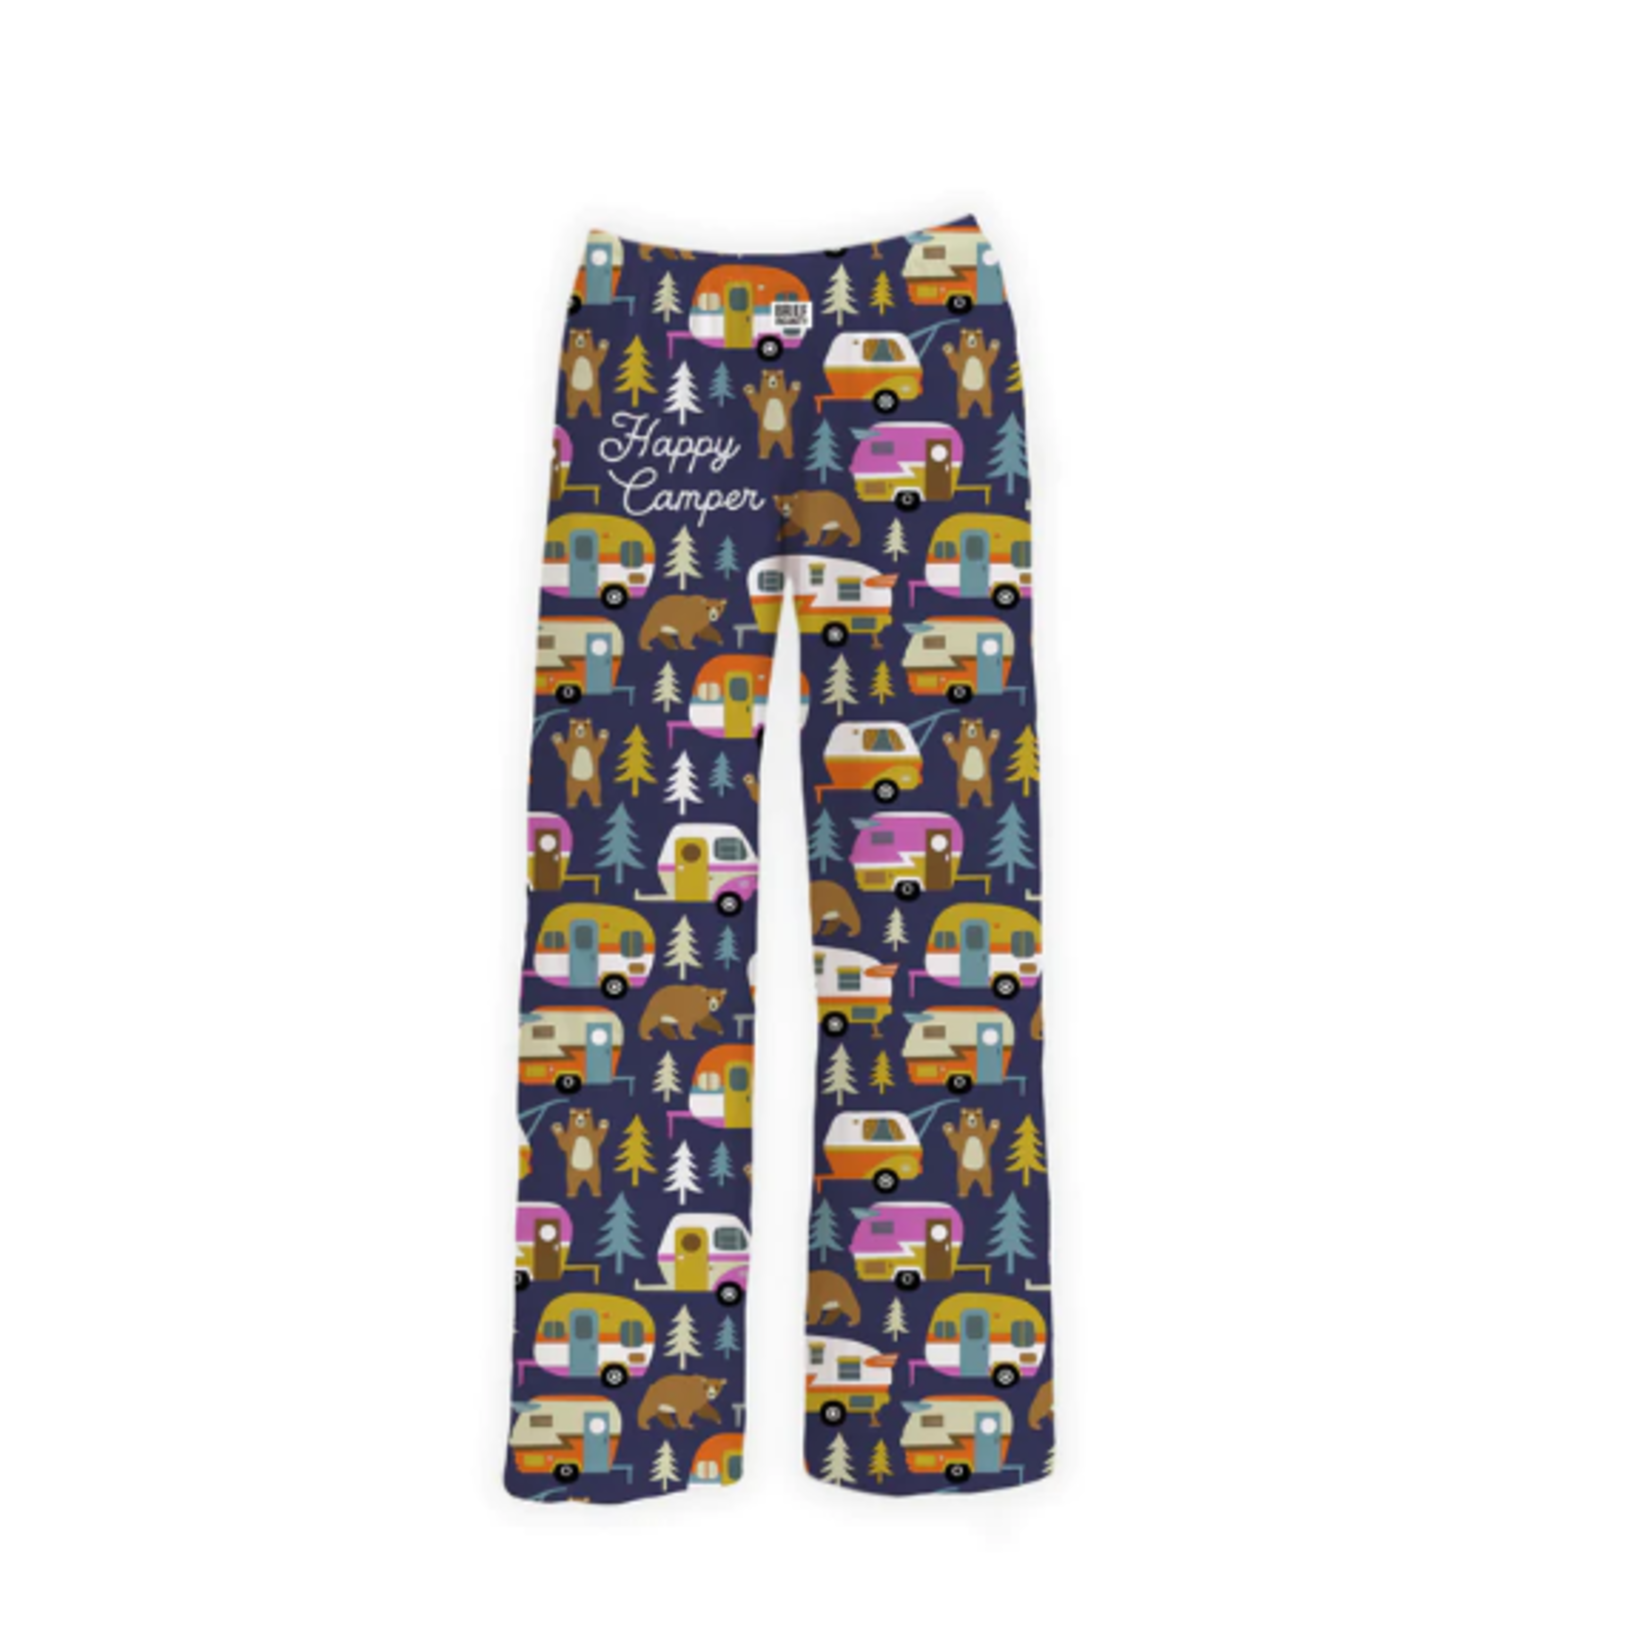 Brief Insanity Brief Insanity Happy Camper Lounge Pants